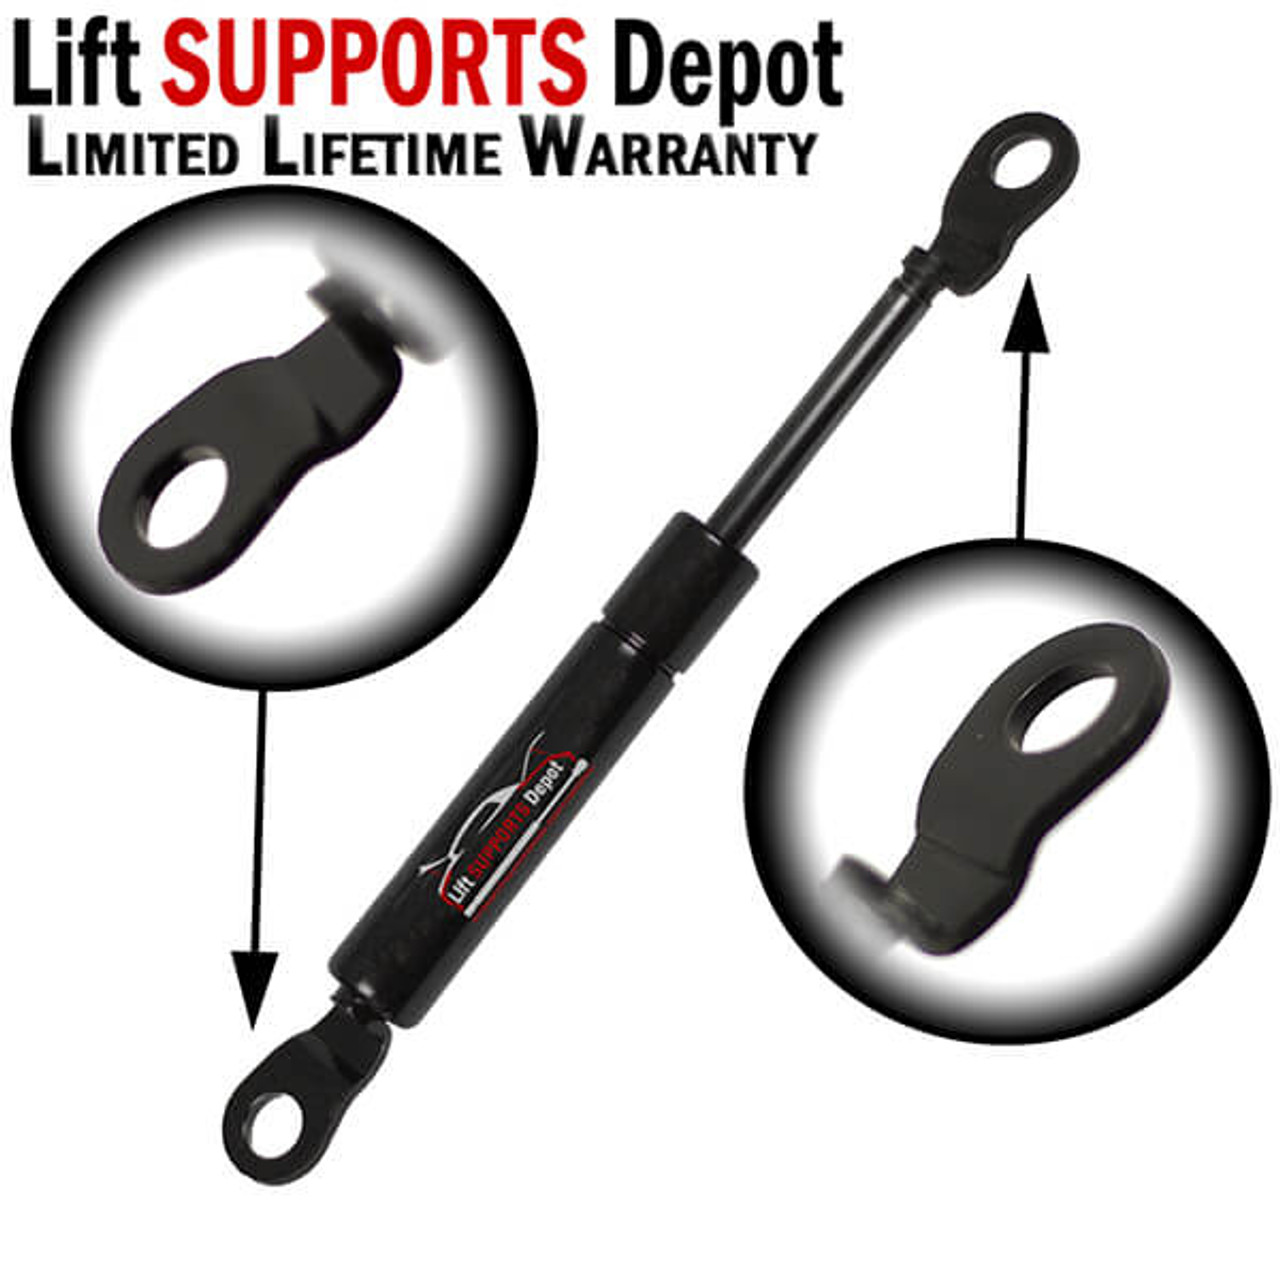 Lift Supports Depot PM1002 for the Seat - With 5 Year Warranty